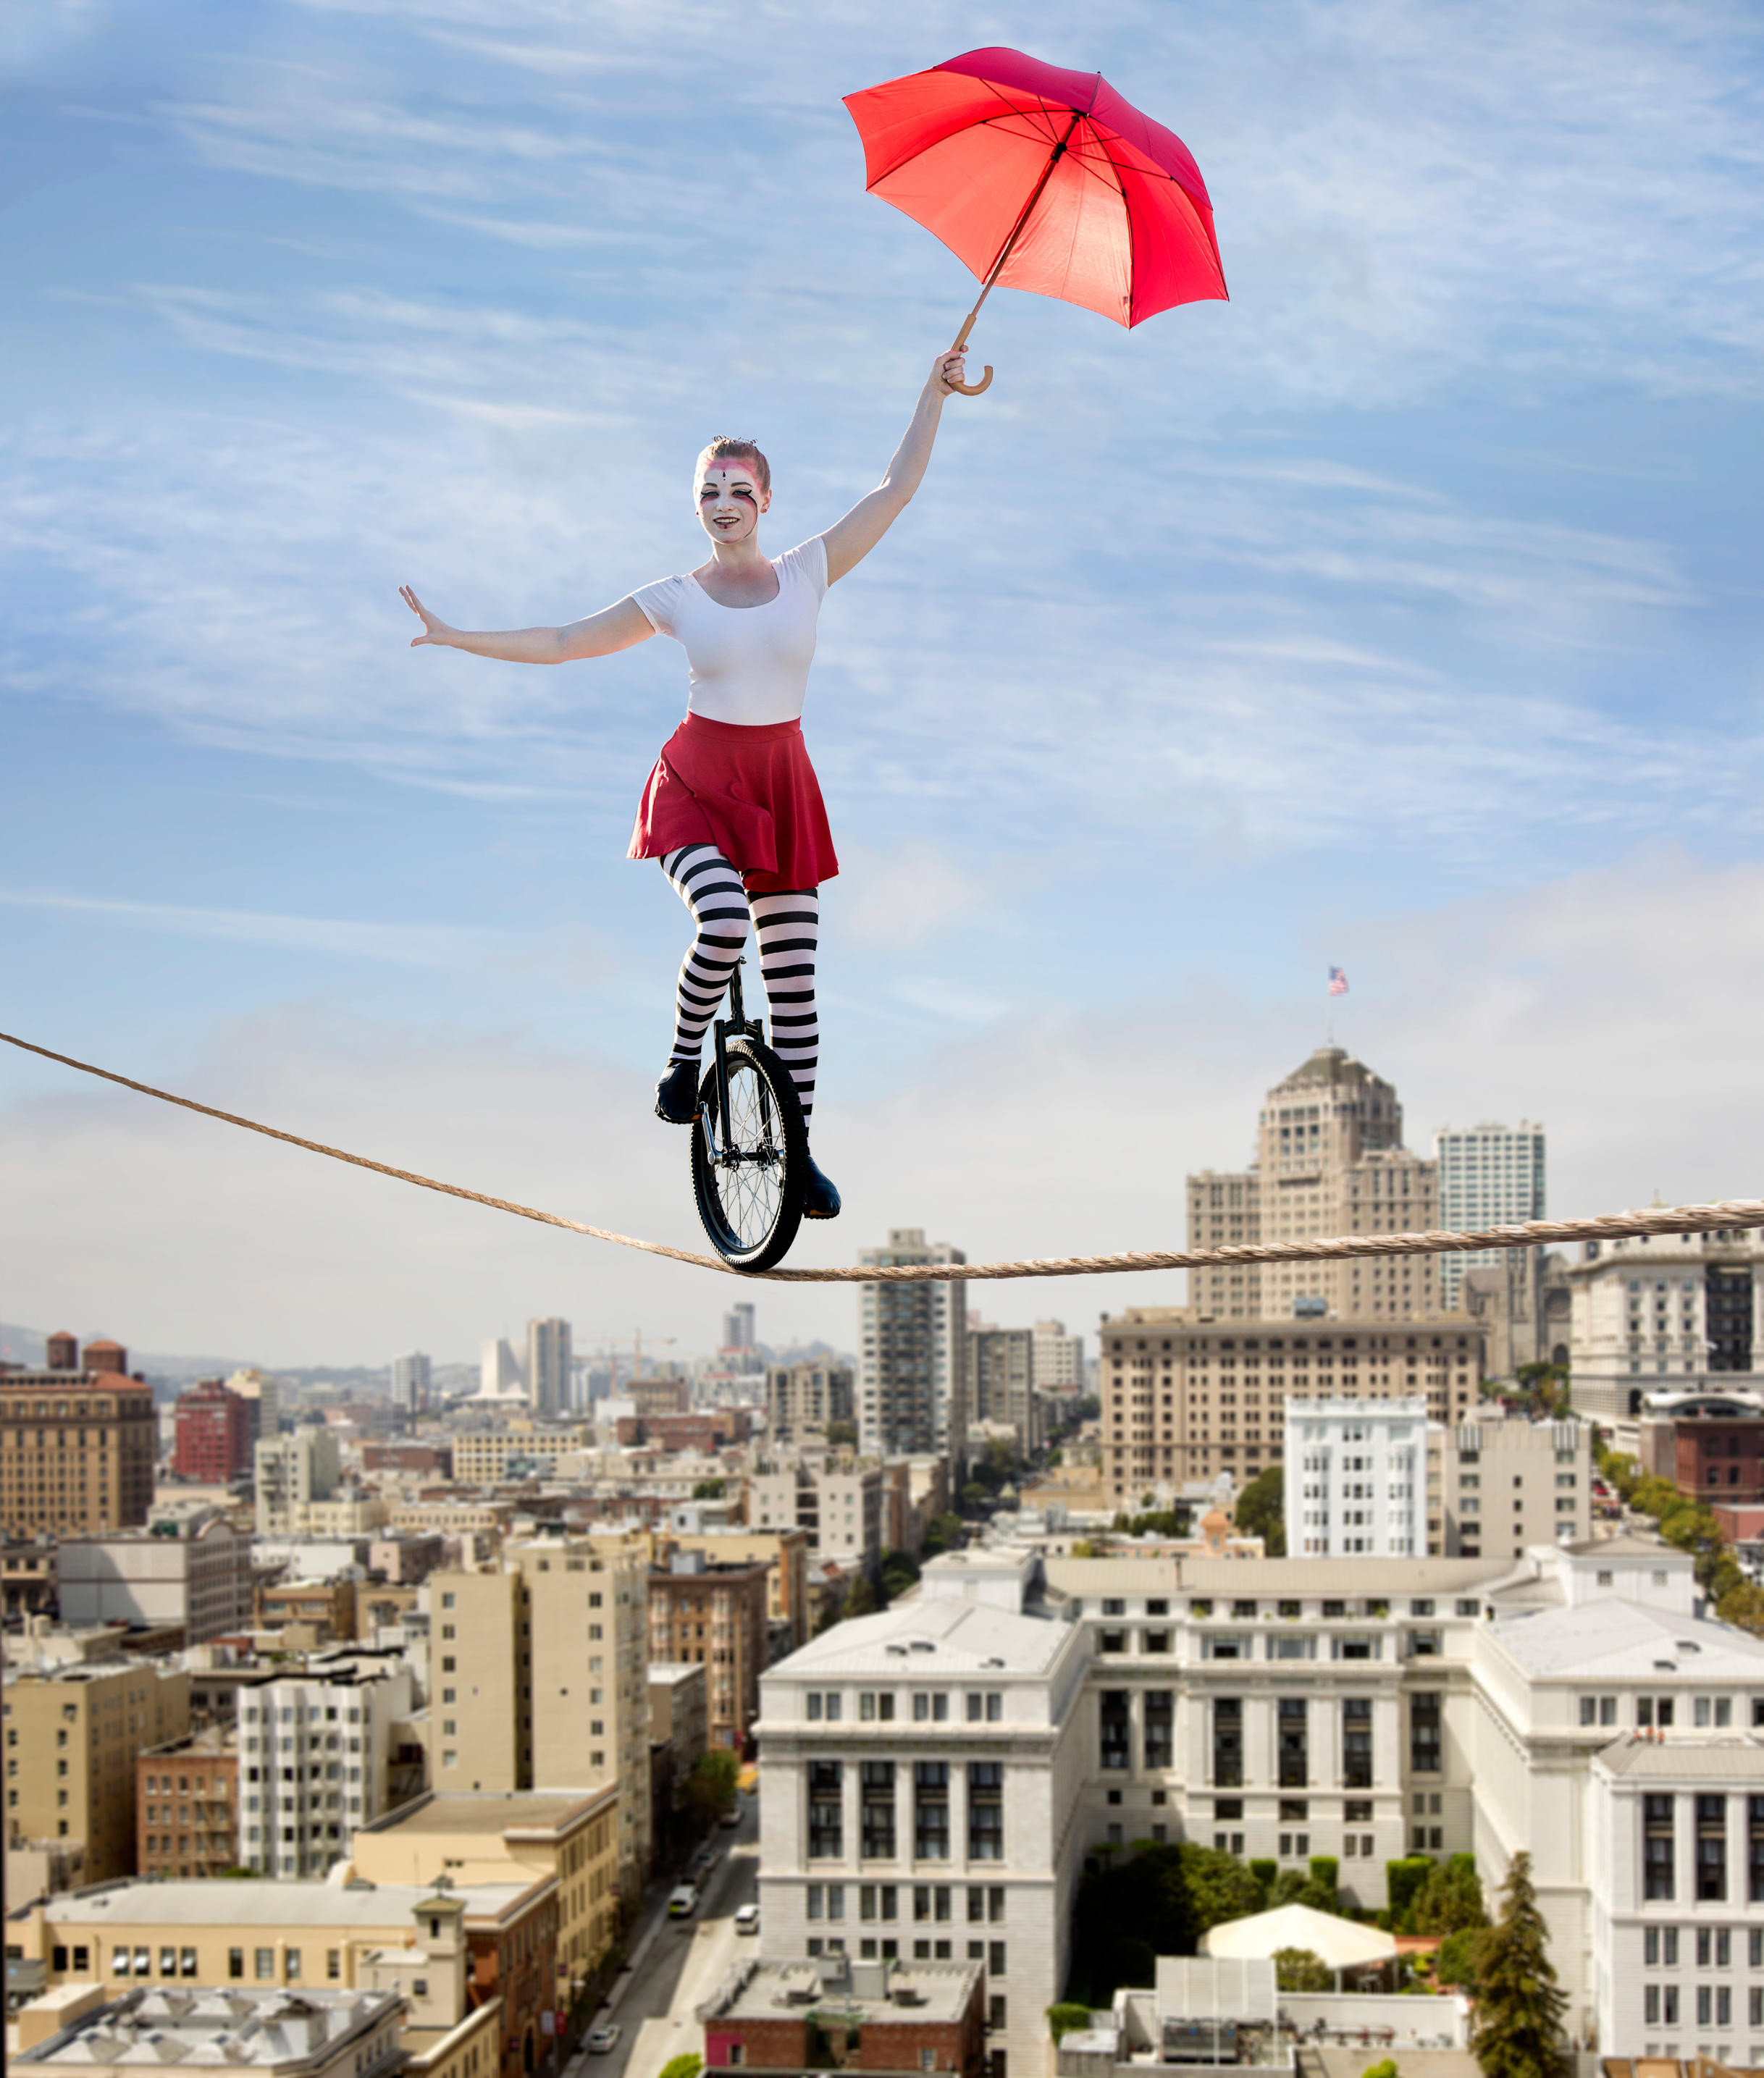 Circus Tightrope Walker on a Unicycle